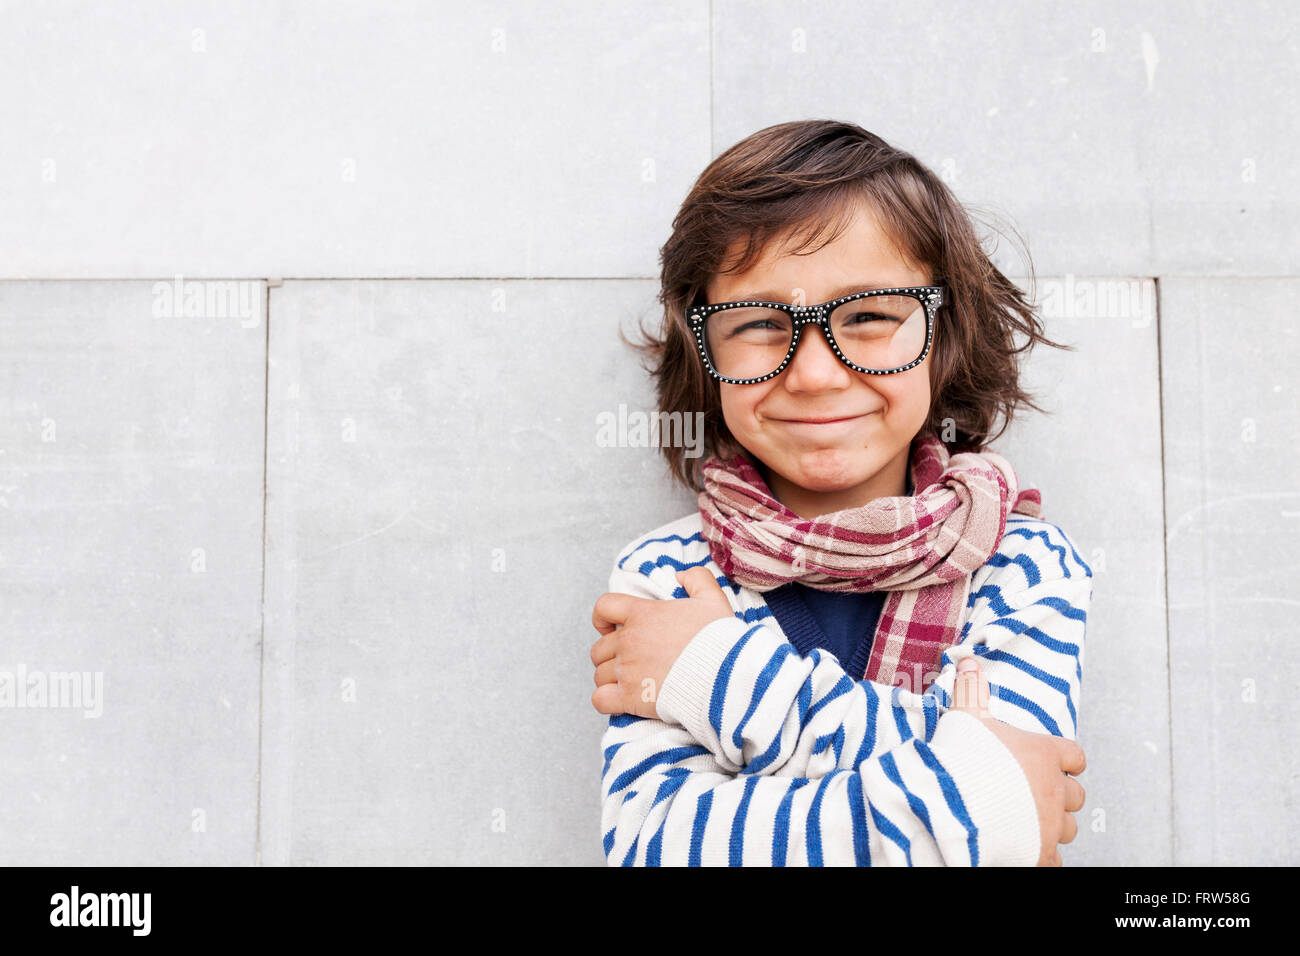 Portrait of grinning little boy wearing scarf and oversized glasses Stock Photo